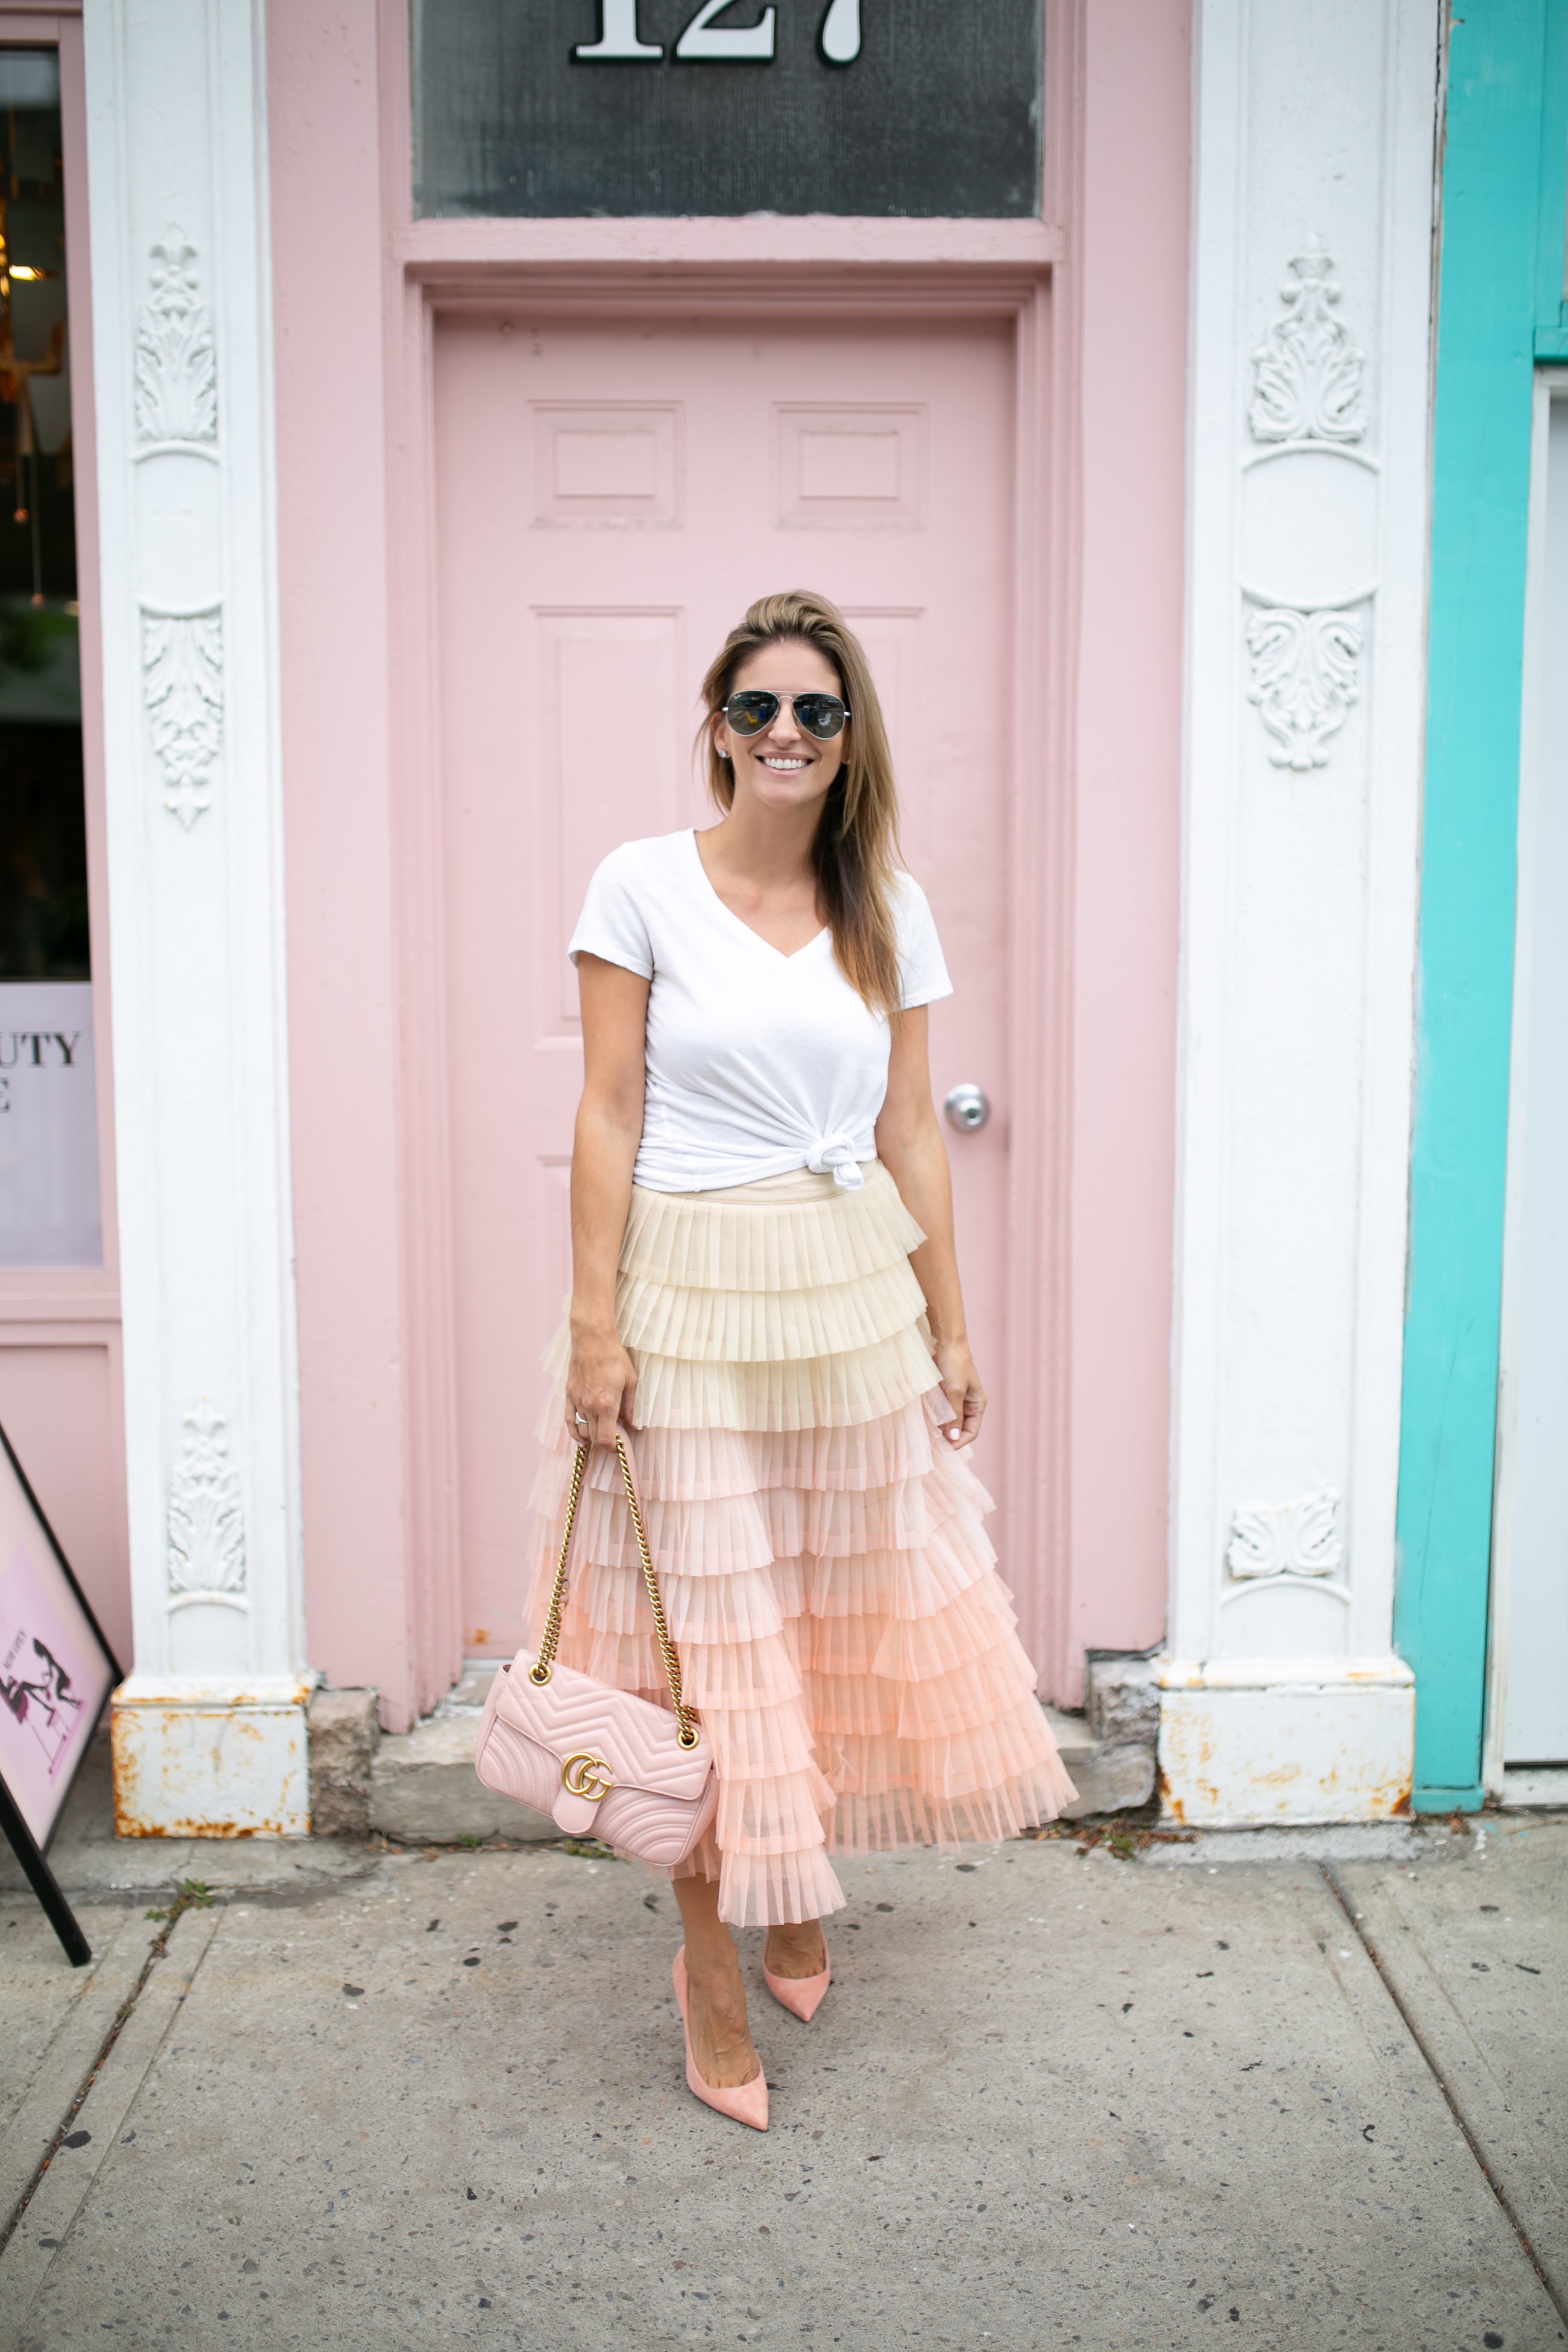 Sweetest DreamChicwish Gradient Tiered Mesh Skirt; tiered maxi skirt; how to style a tulle skirt; fall fashion; durham region blogger Mandy Furnis; sparkleshinylove; whitby style blogger